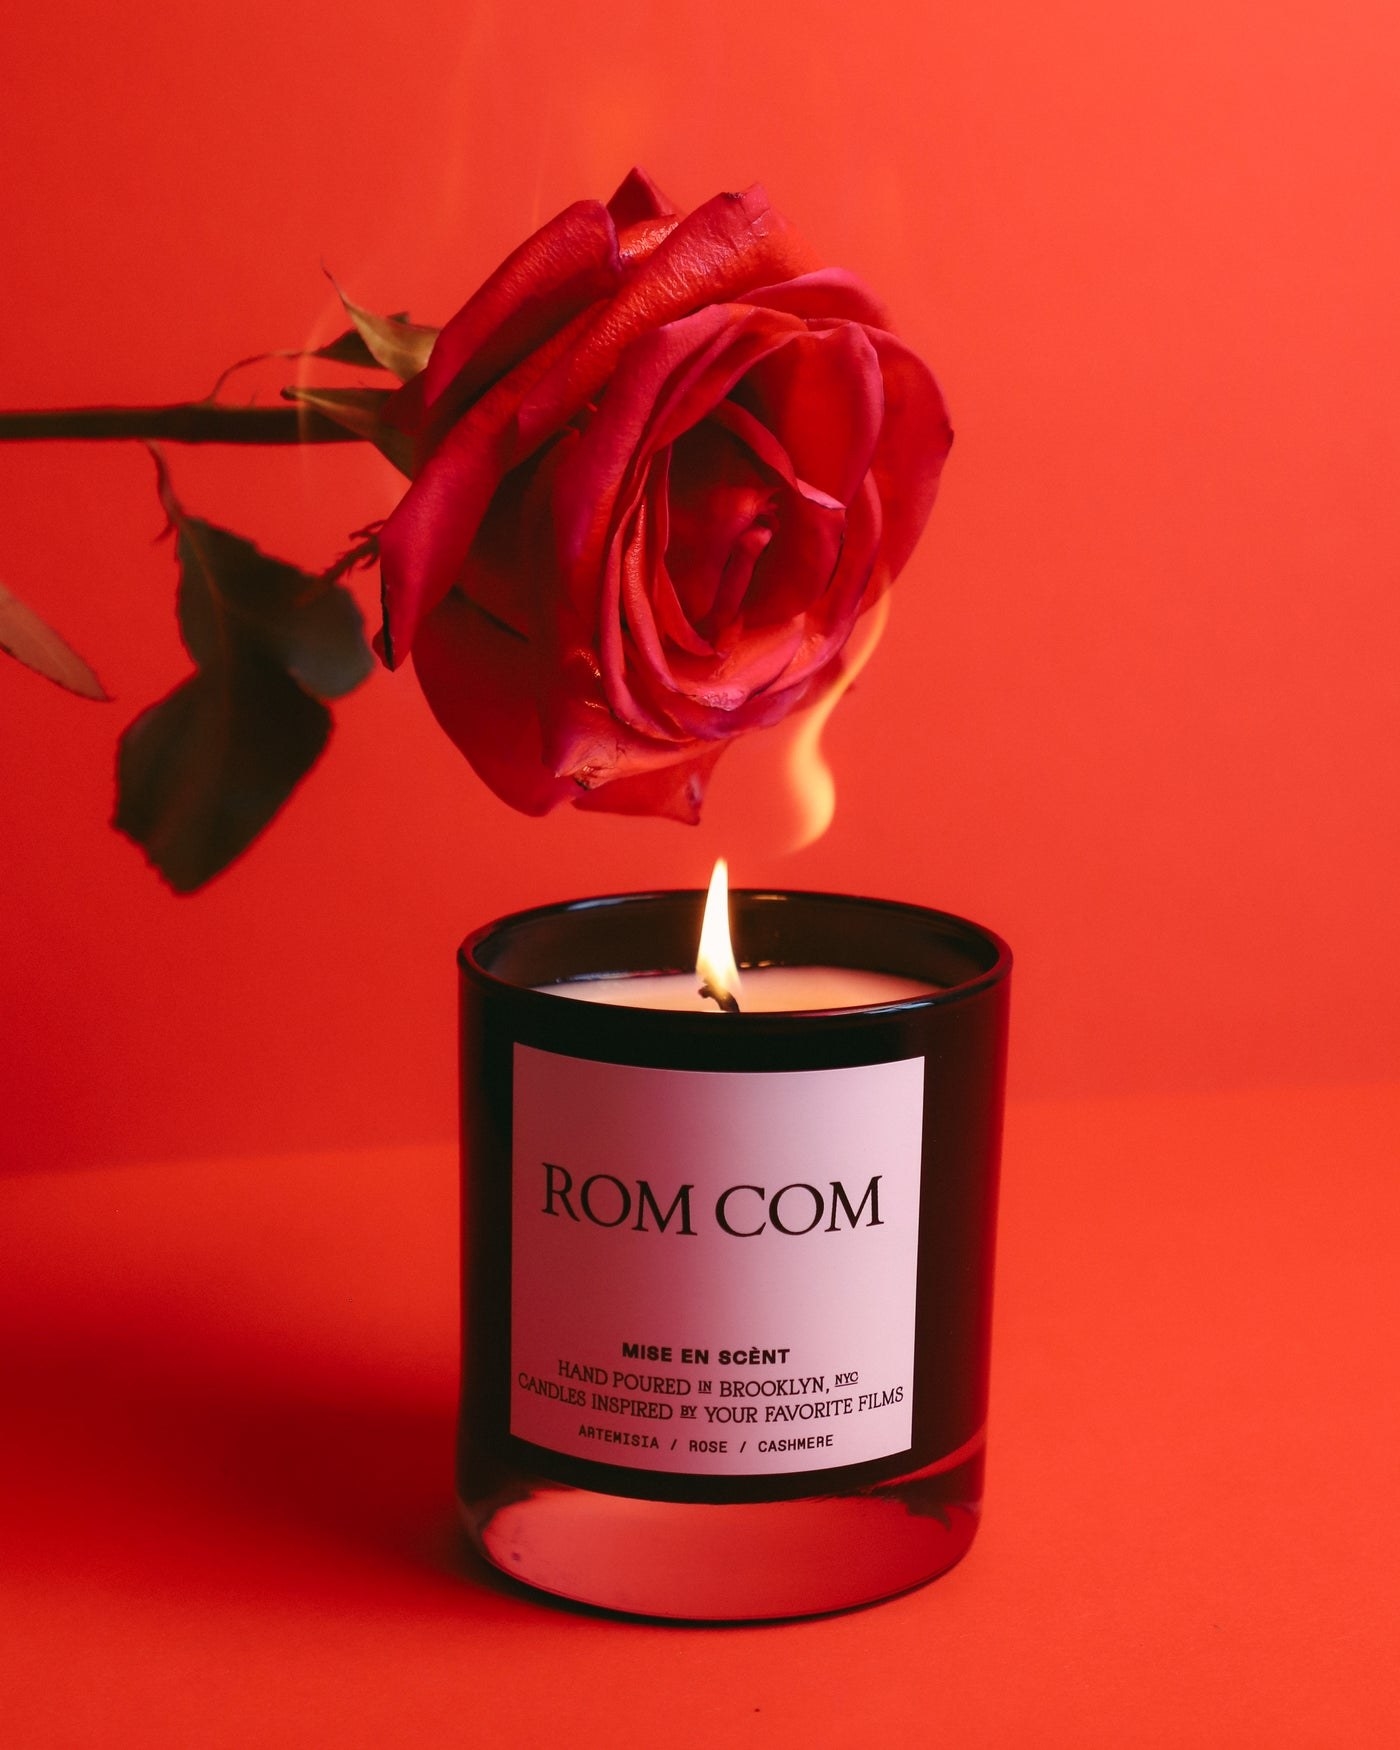 &quot;rom com&quot; candle burning a red rose